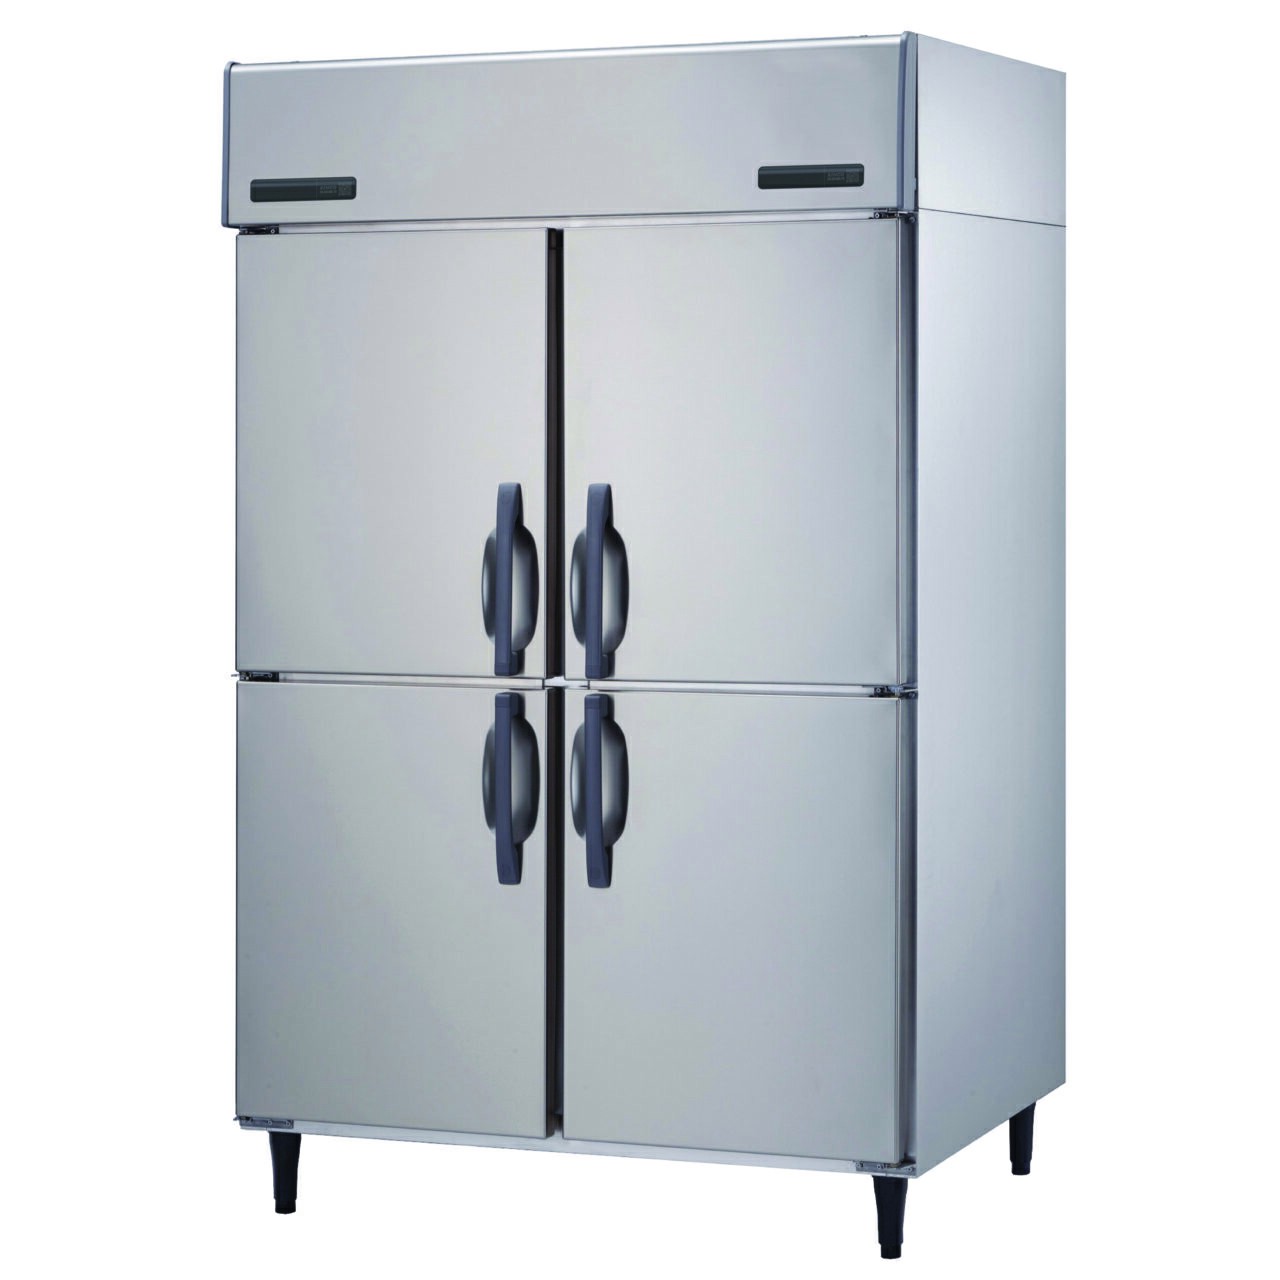 -22~-7℃/-6~12℃ Air Cooling 4 Solid Doors Dual Temperature Upright Reach-in Refrigerator Commercial Refrigerator